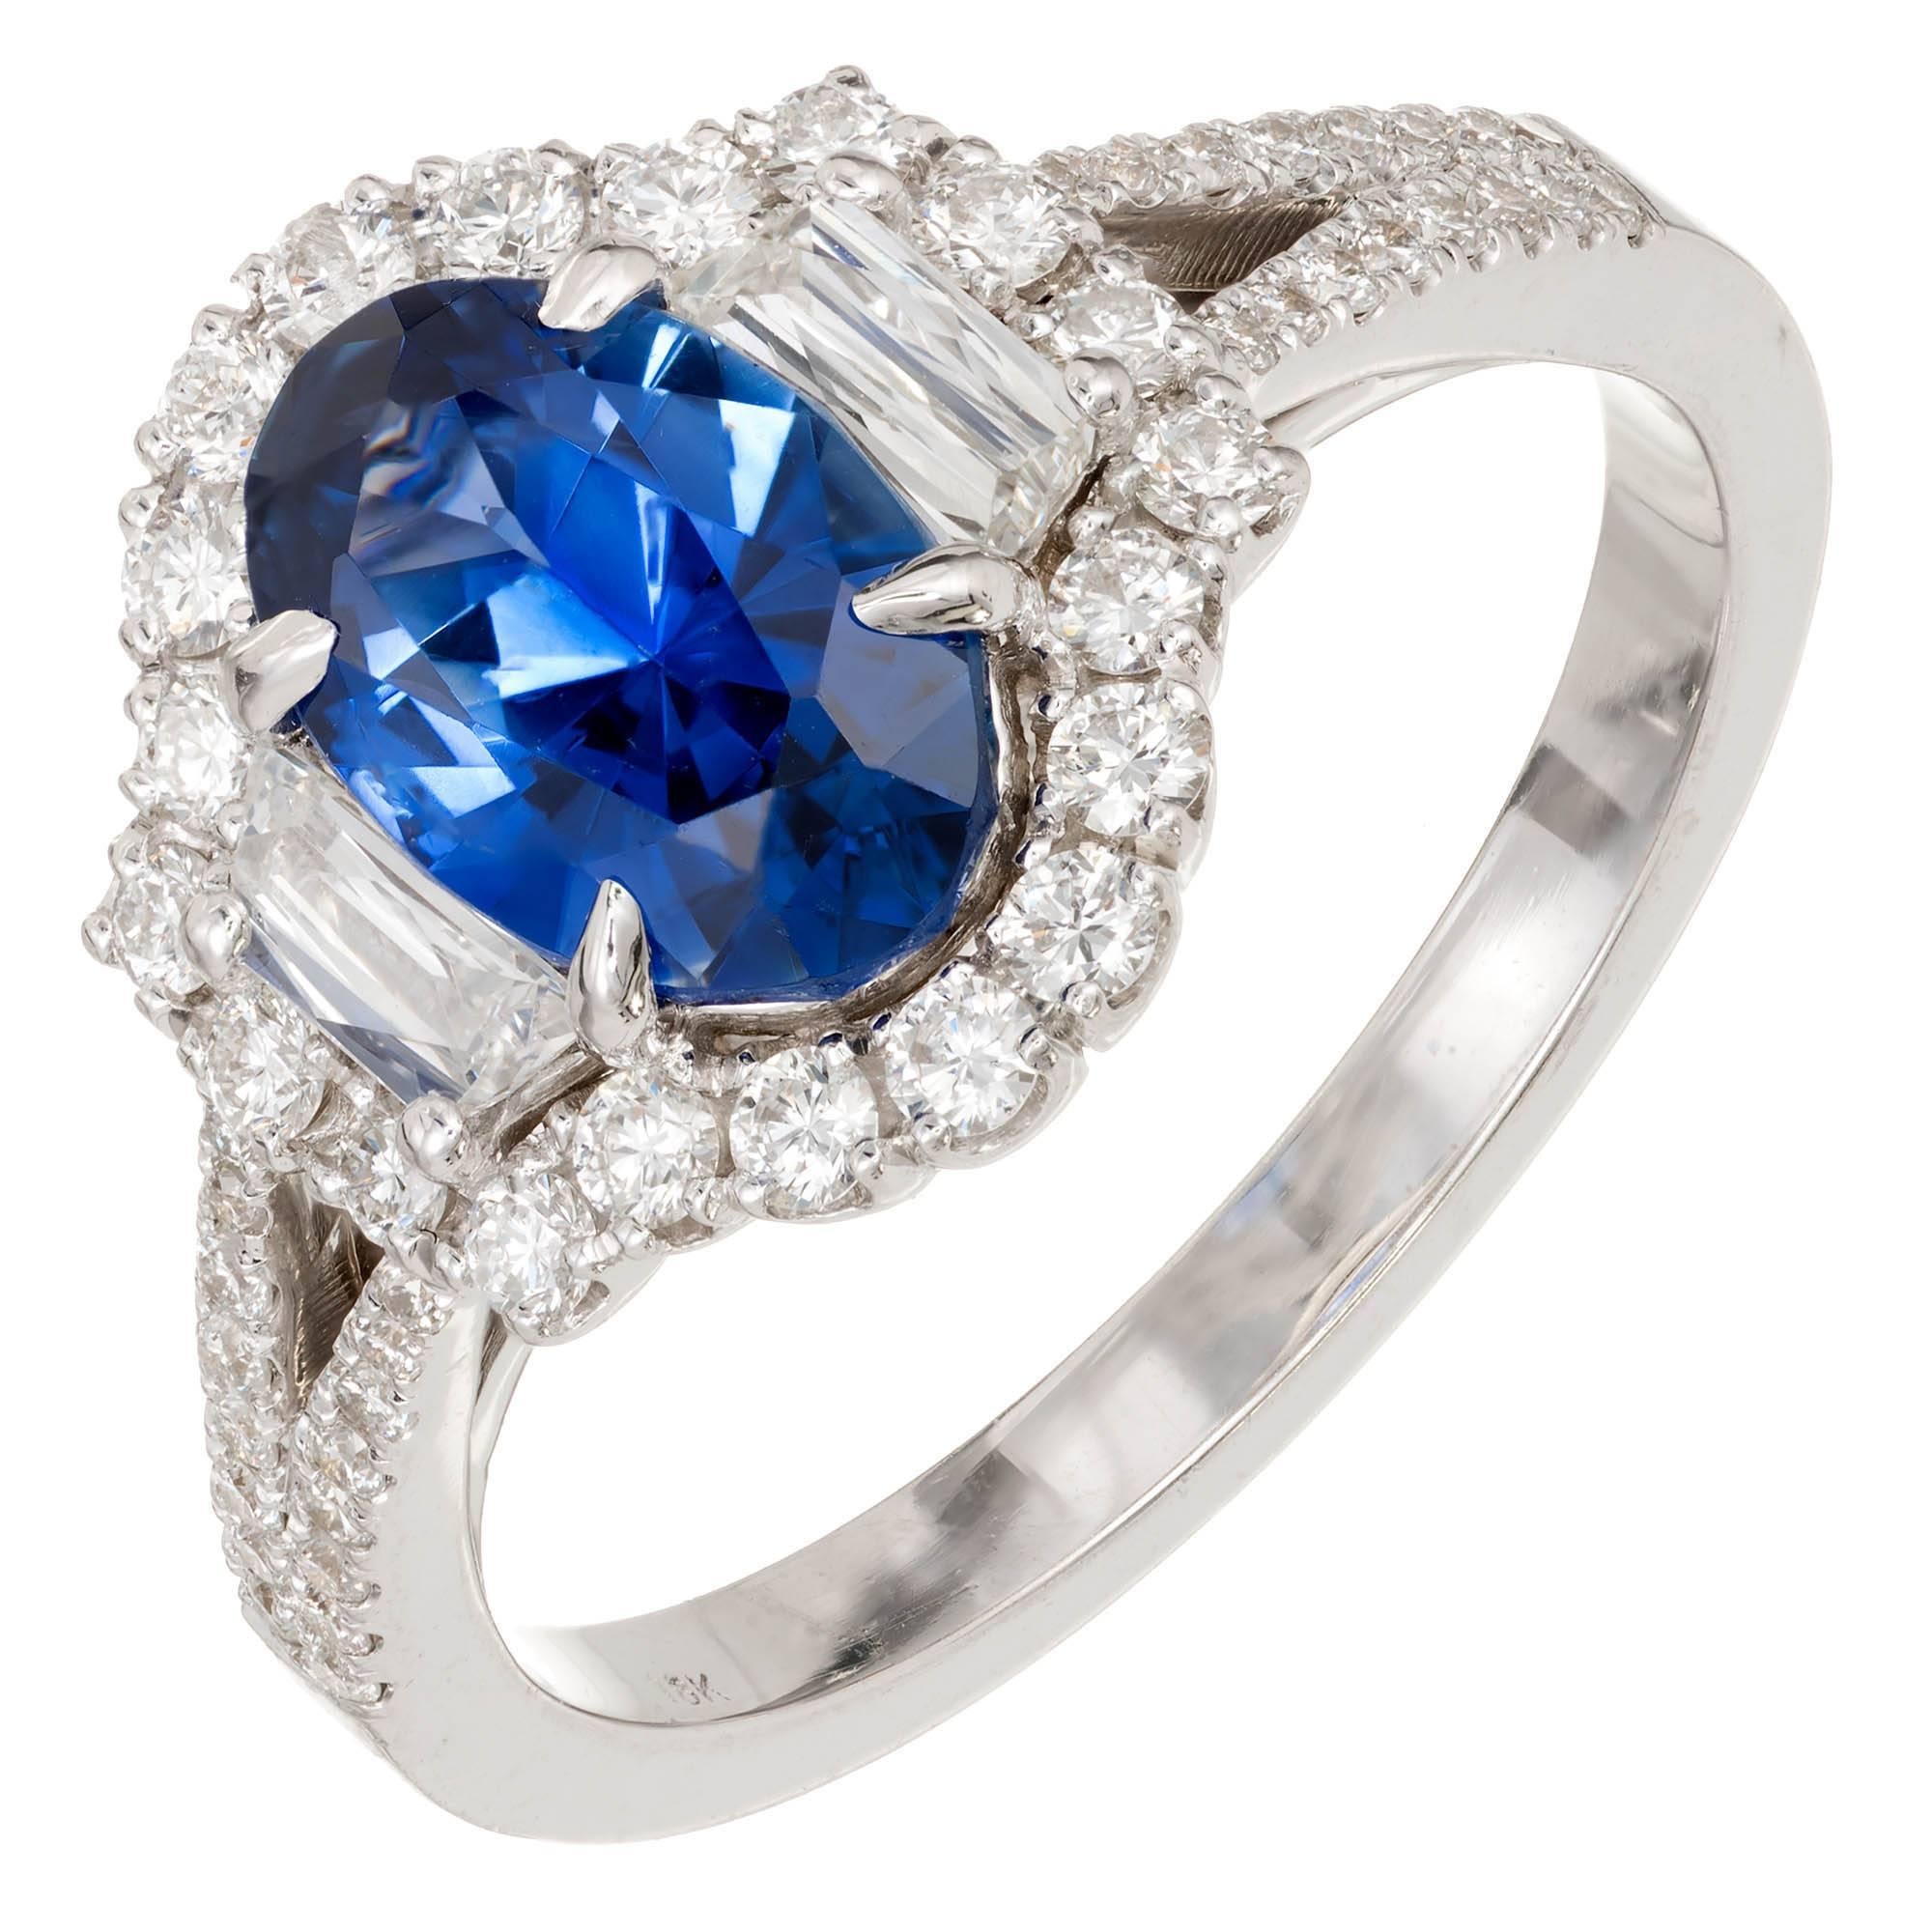 Natural vivid cornflower blue 1.82 ct GIA certified Sapphire and diamond halo engagement ring. The setting was designed and made in the Peter Suchy Workshop to show of the center stone with a halo of full cut diamonds and two trapezoid side